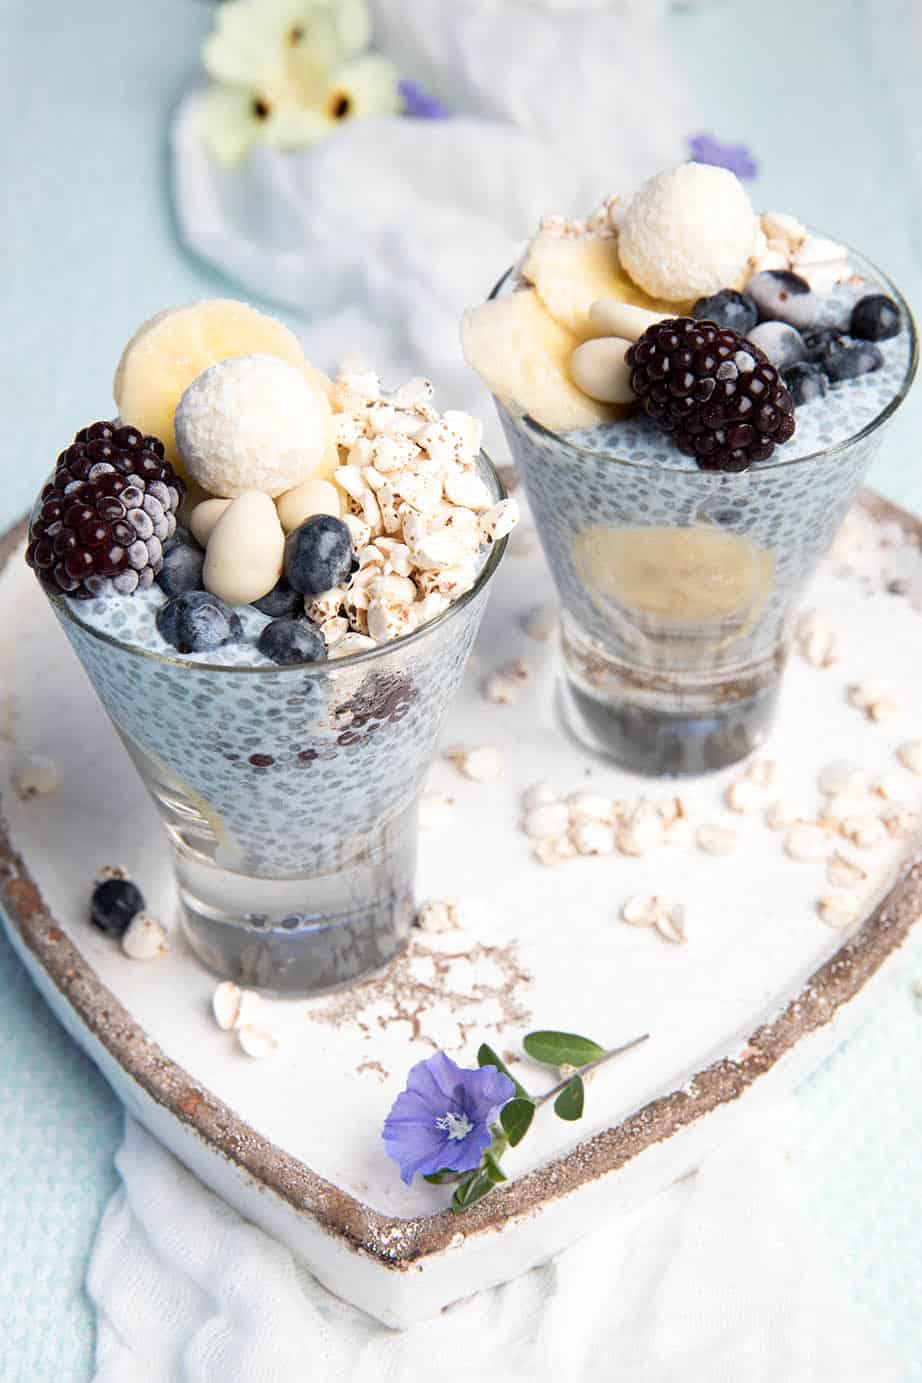 Layered blue chia puding in a glass with berries and banana